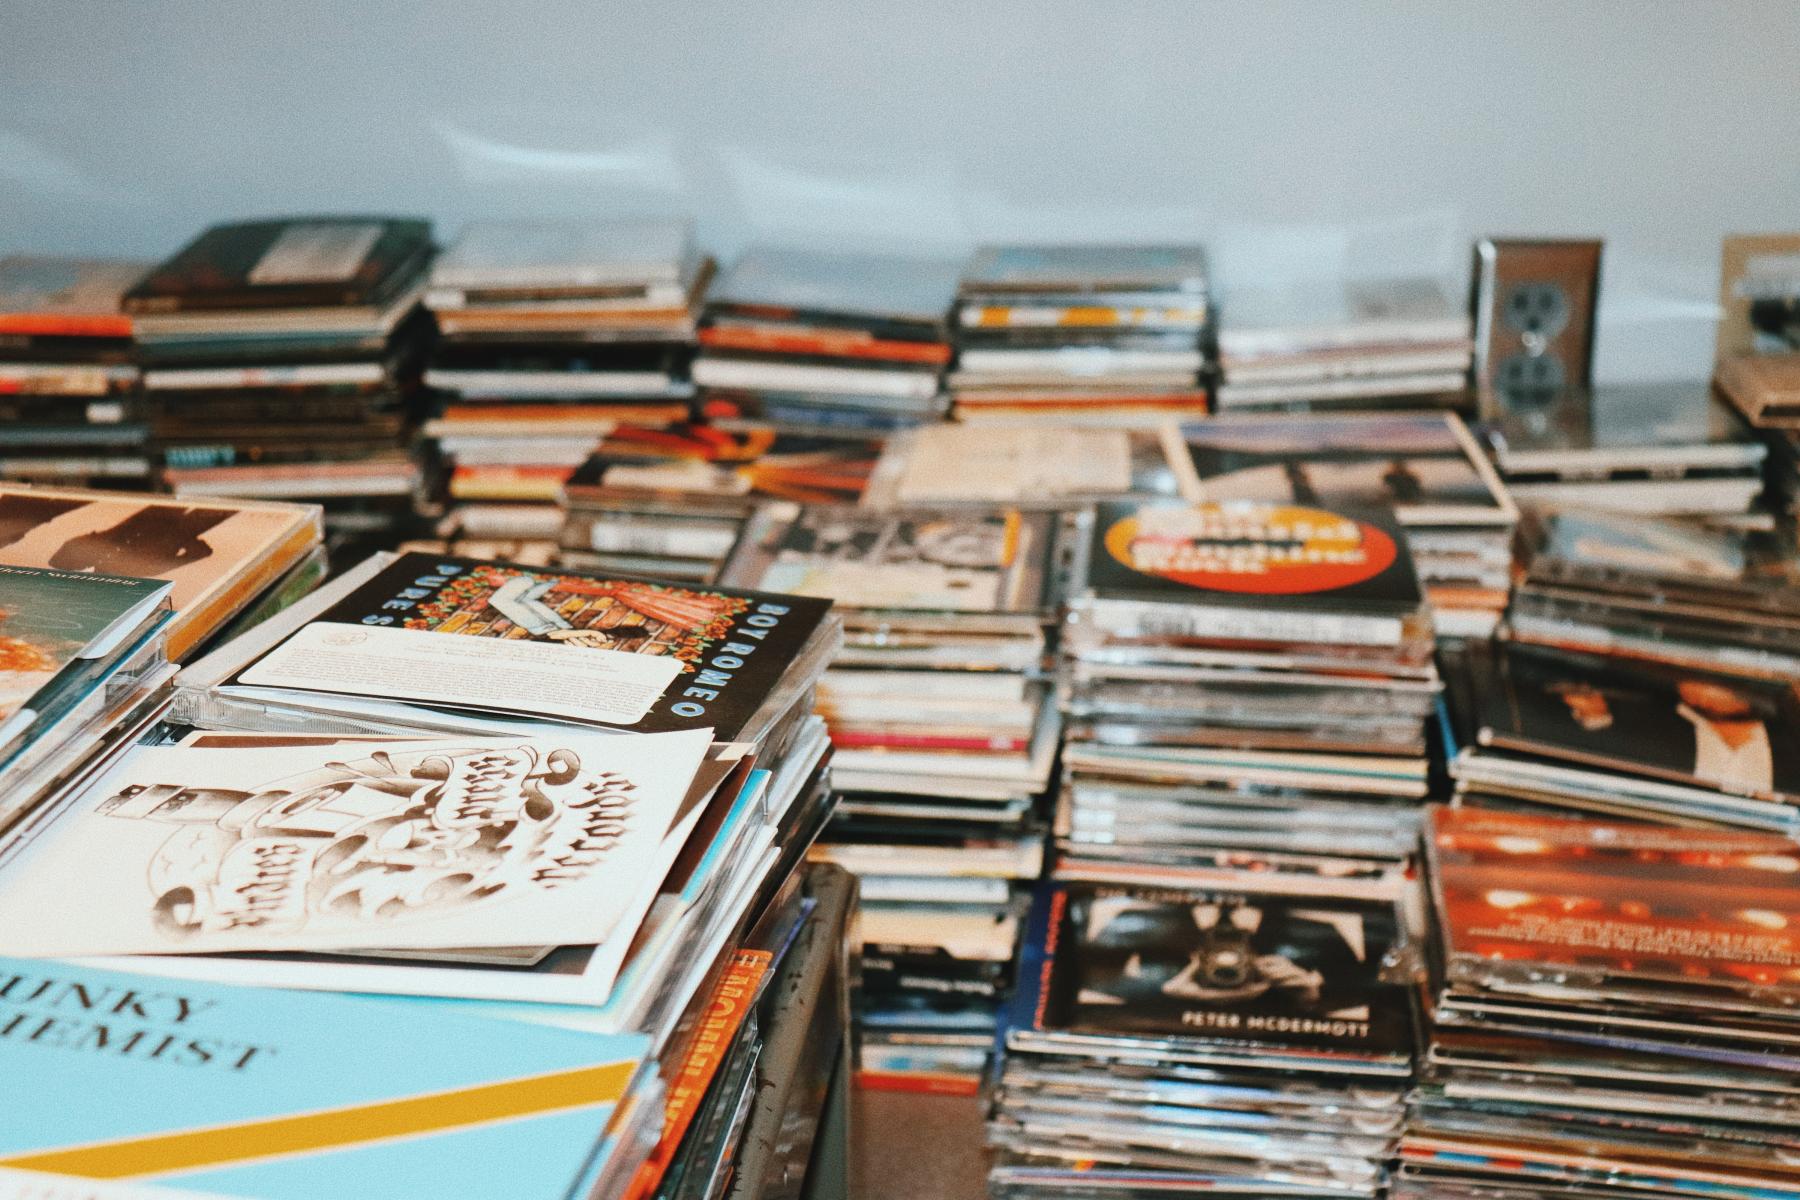 Stacks of records and cds